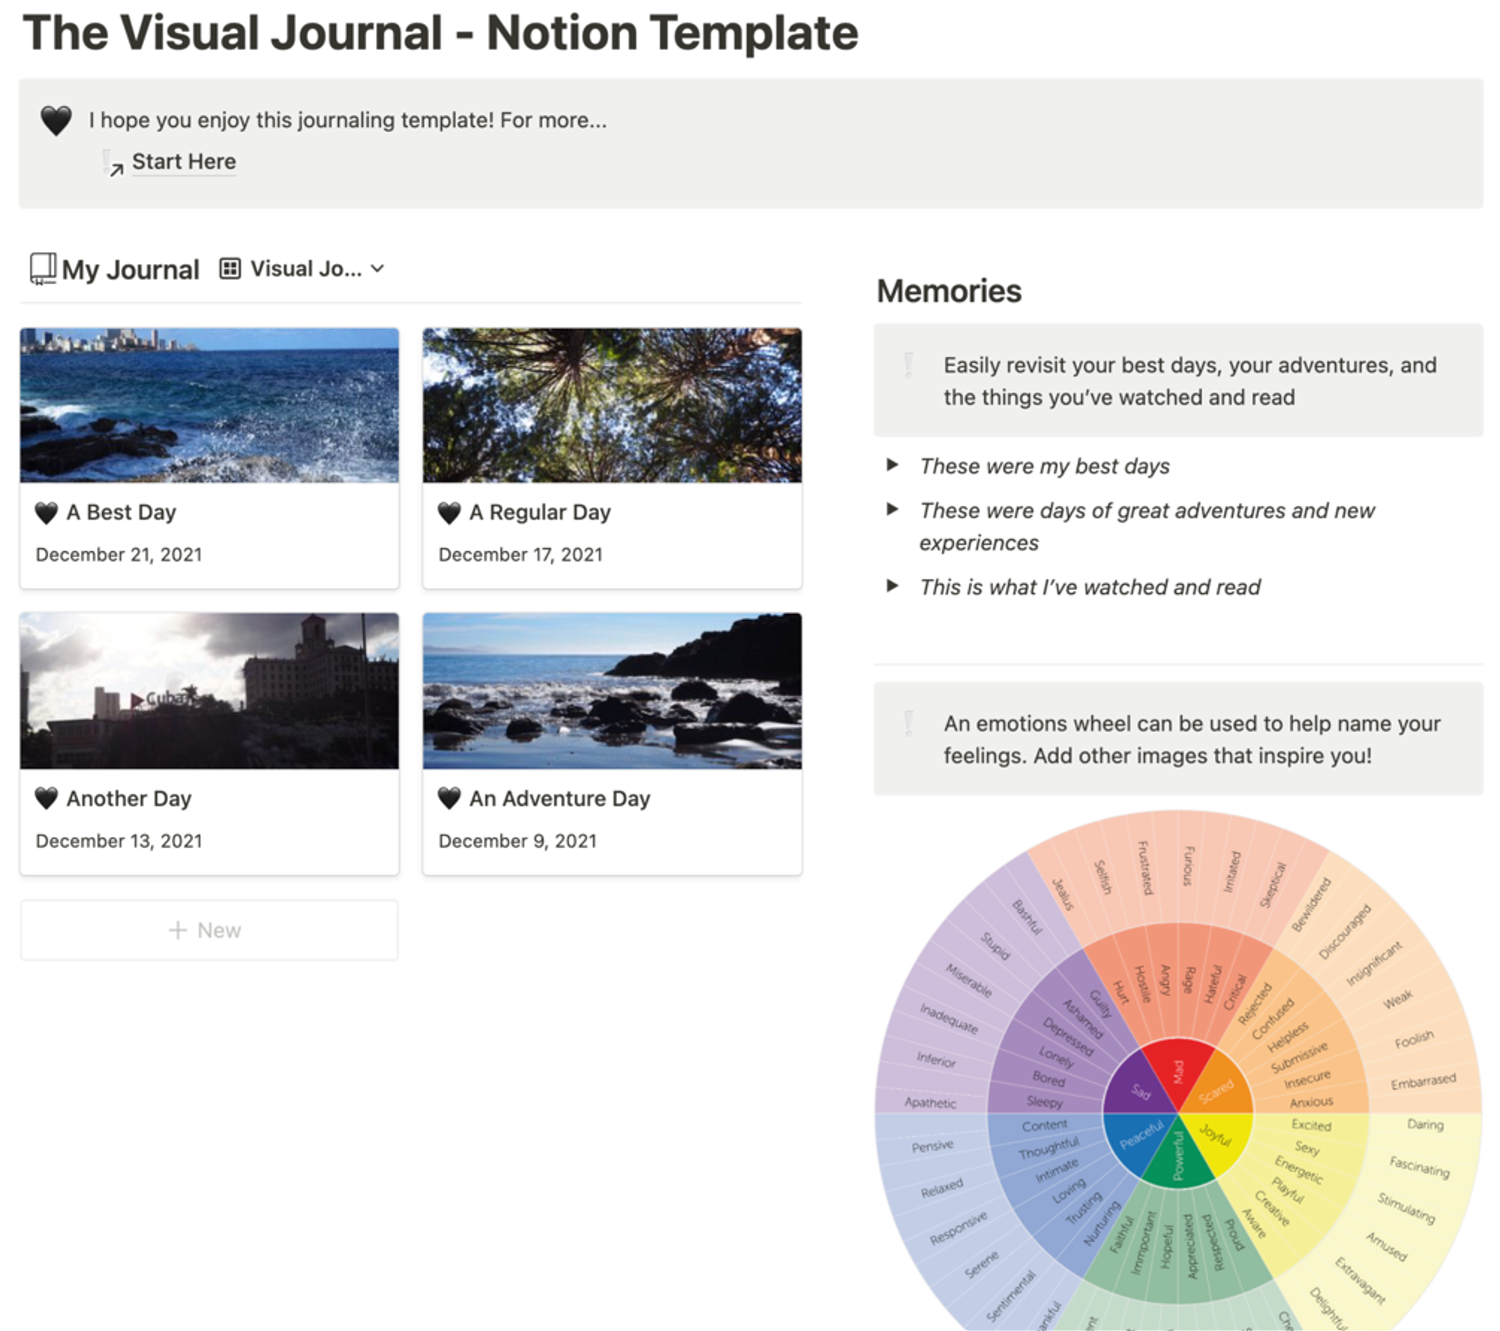 The Visual Journal - Notion Template